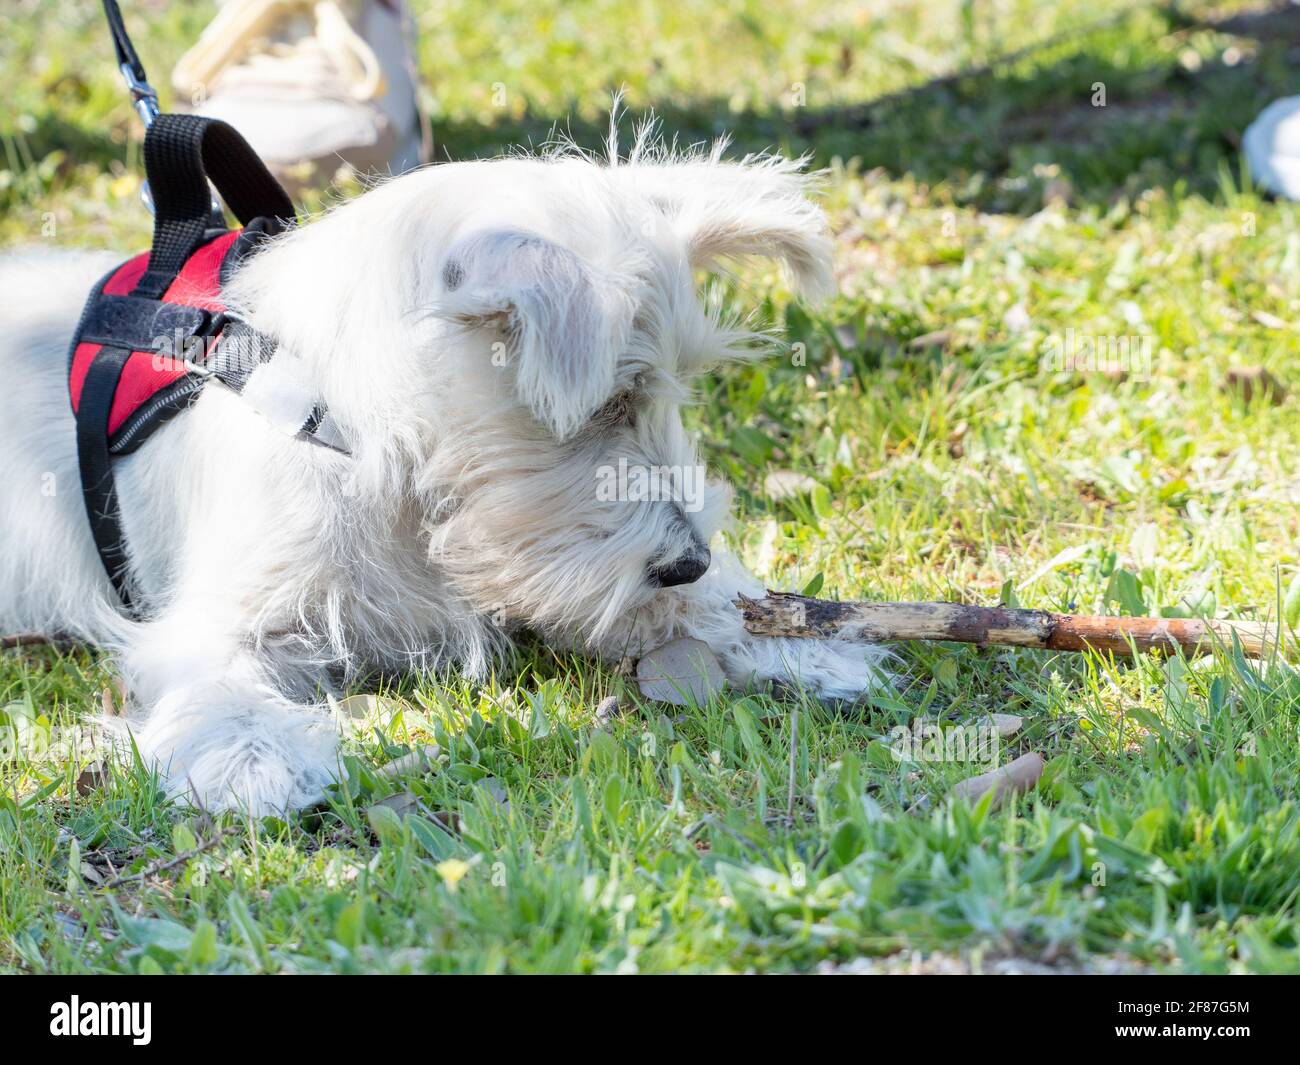 White Schnauzer puppy looks closely at an ant on the ground. Stock Photo